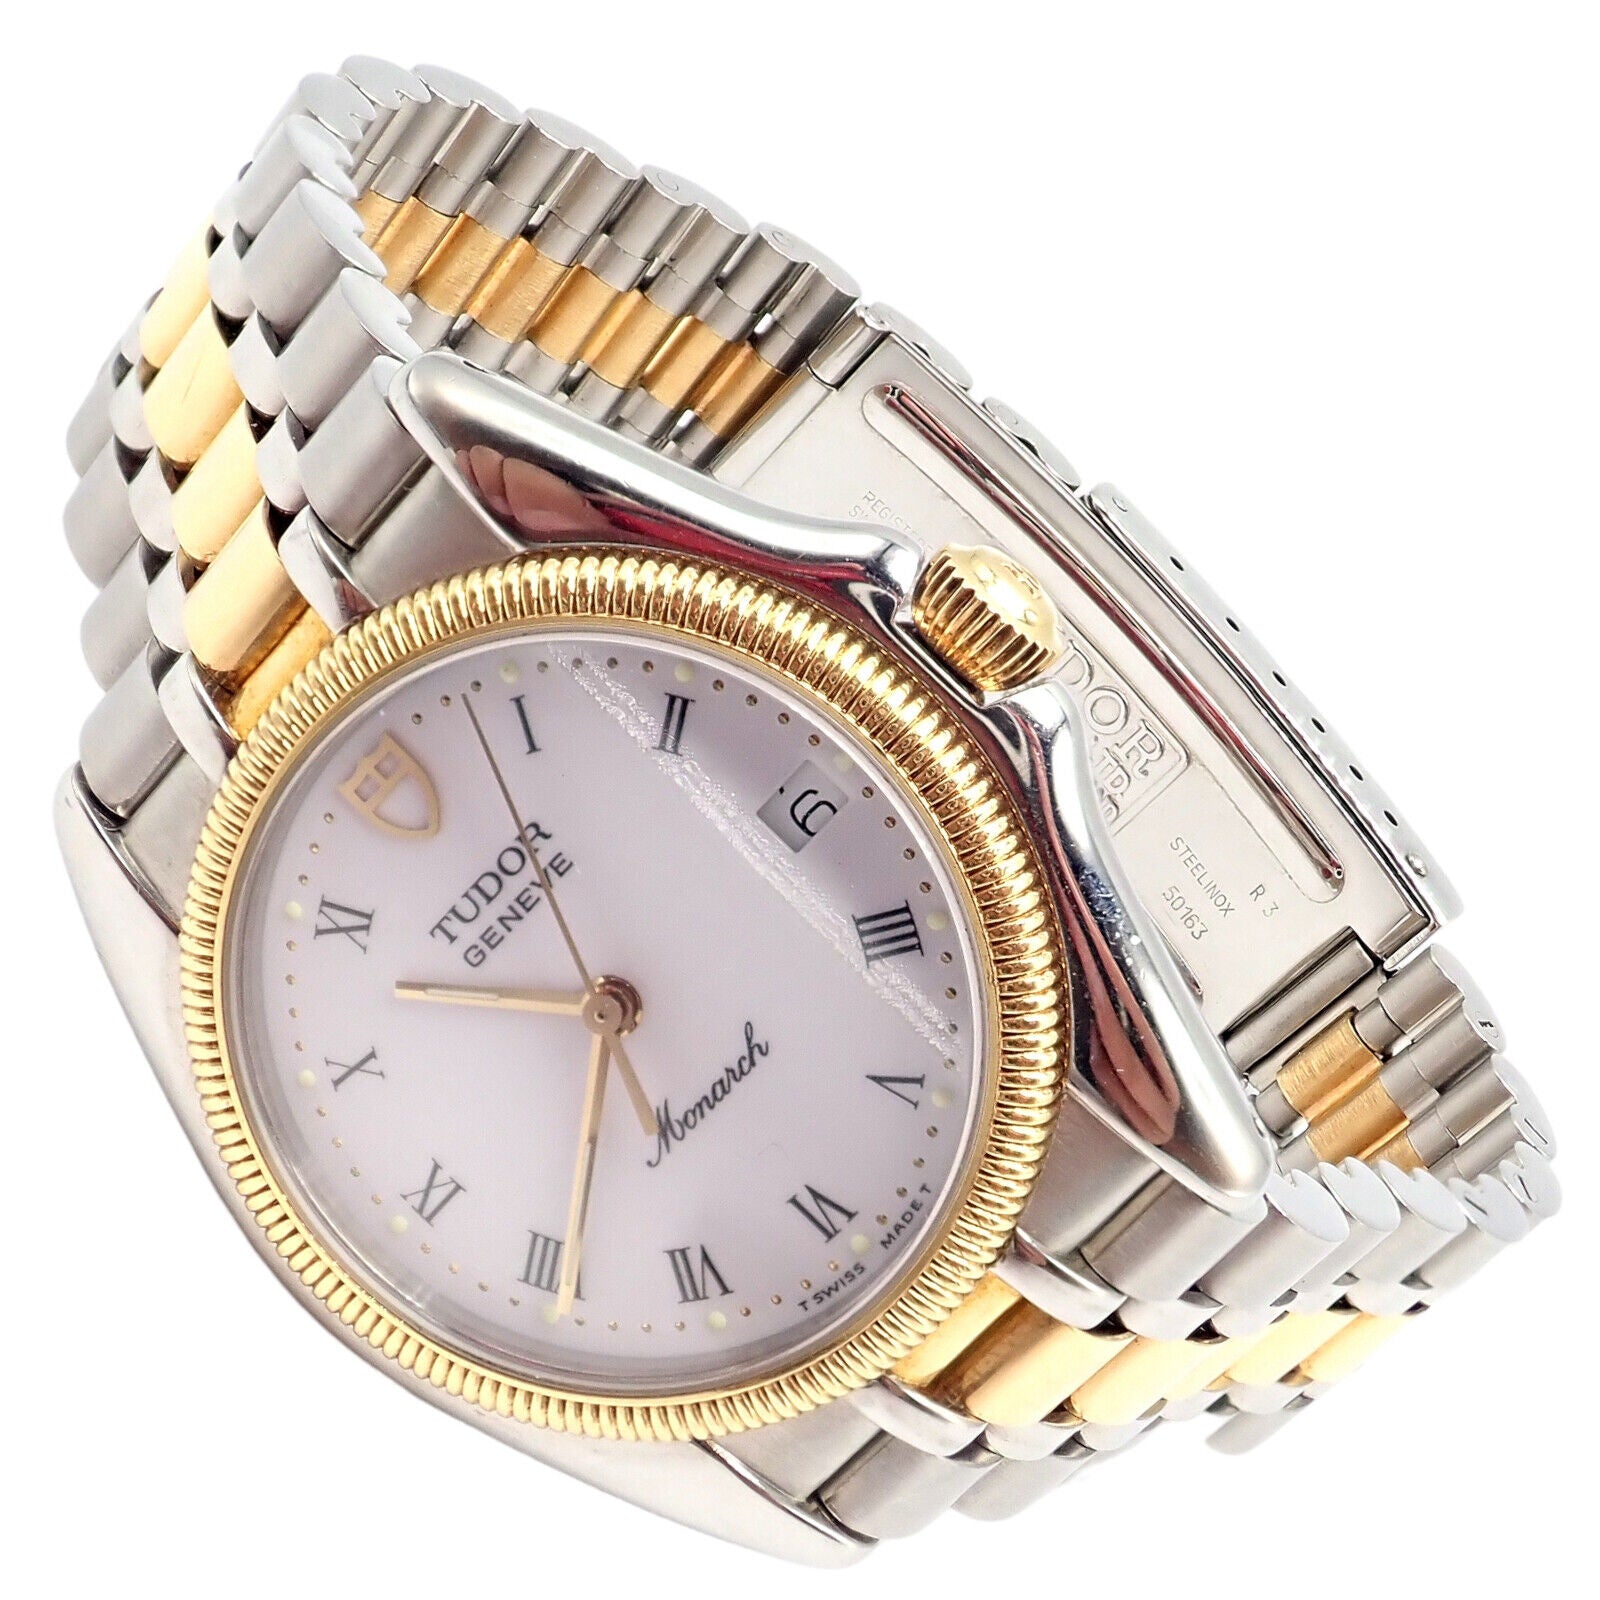 Tudor Jewelry & Watches:Watches, Parts & Accessories:Watches:Wristwatches Authentic Vintage! 1991 Tudor Stainless Steel Two Tone Quartz Watch 15733